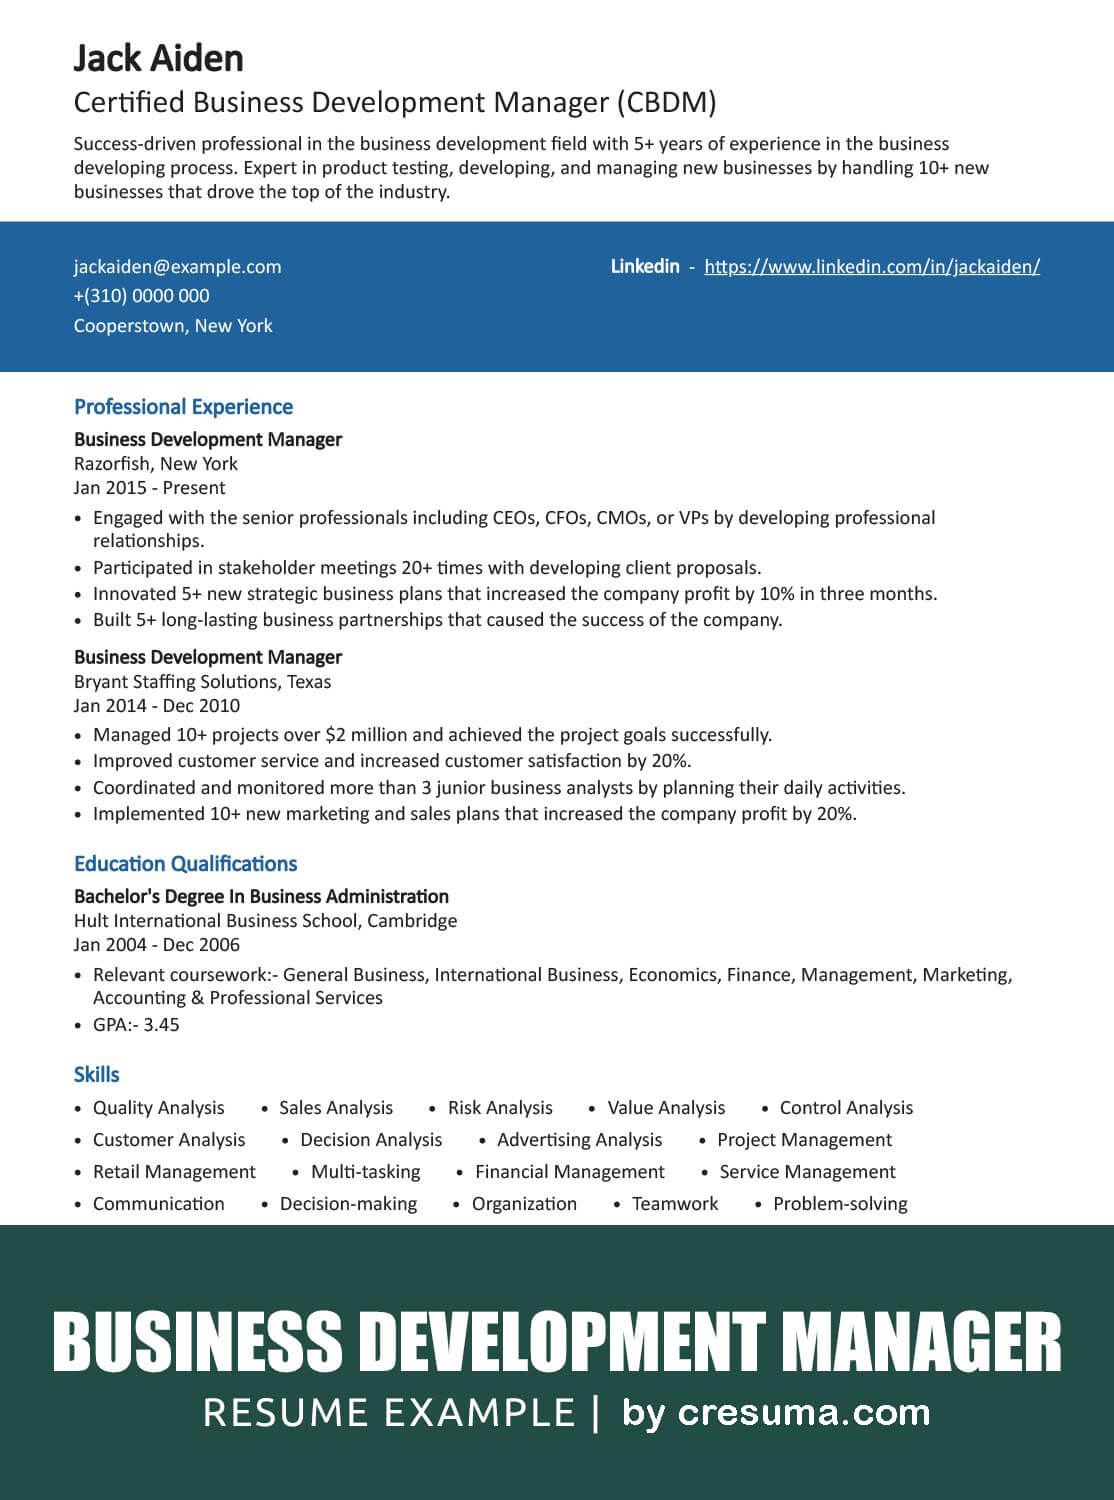 Business Development Manager resume example image